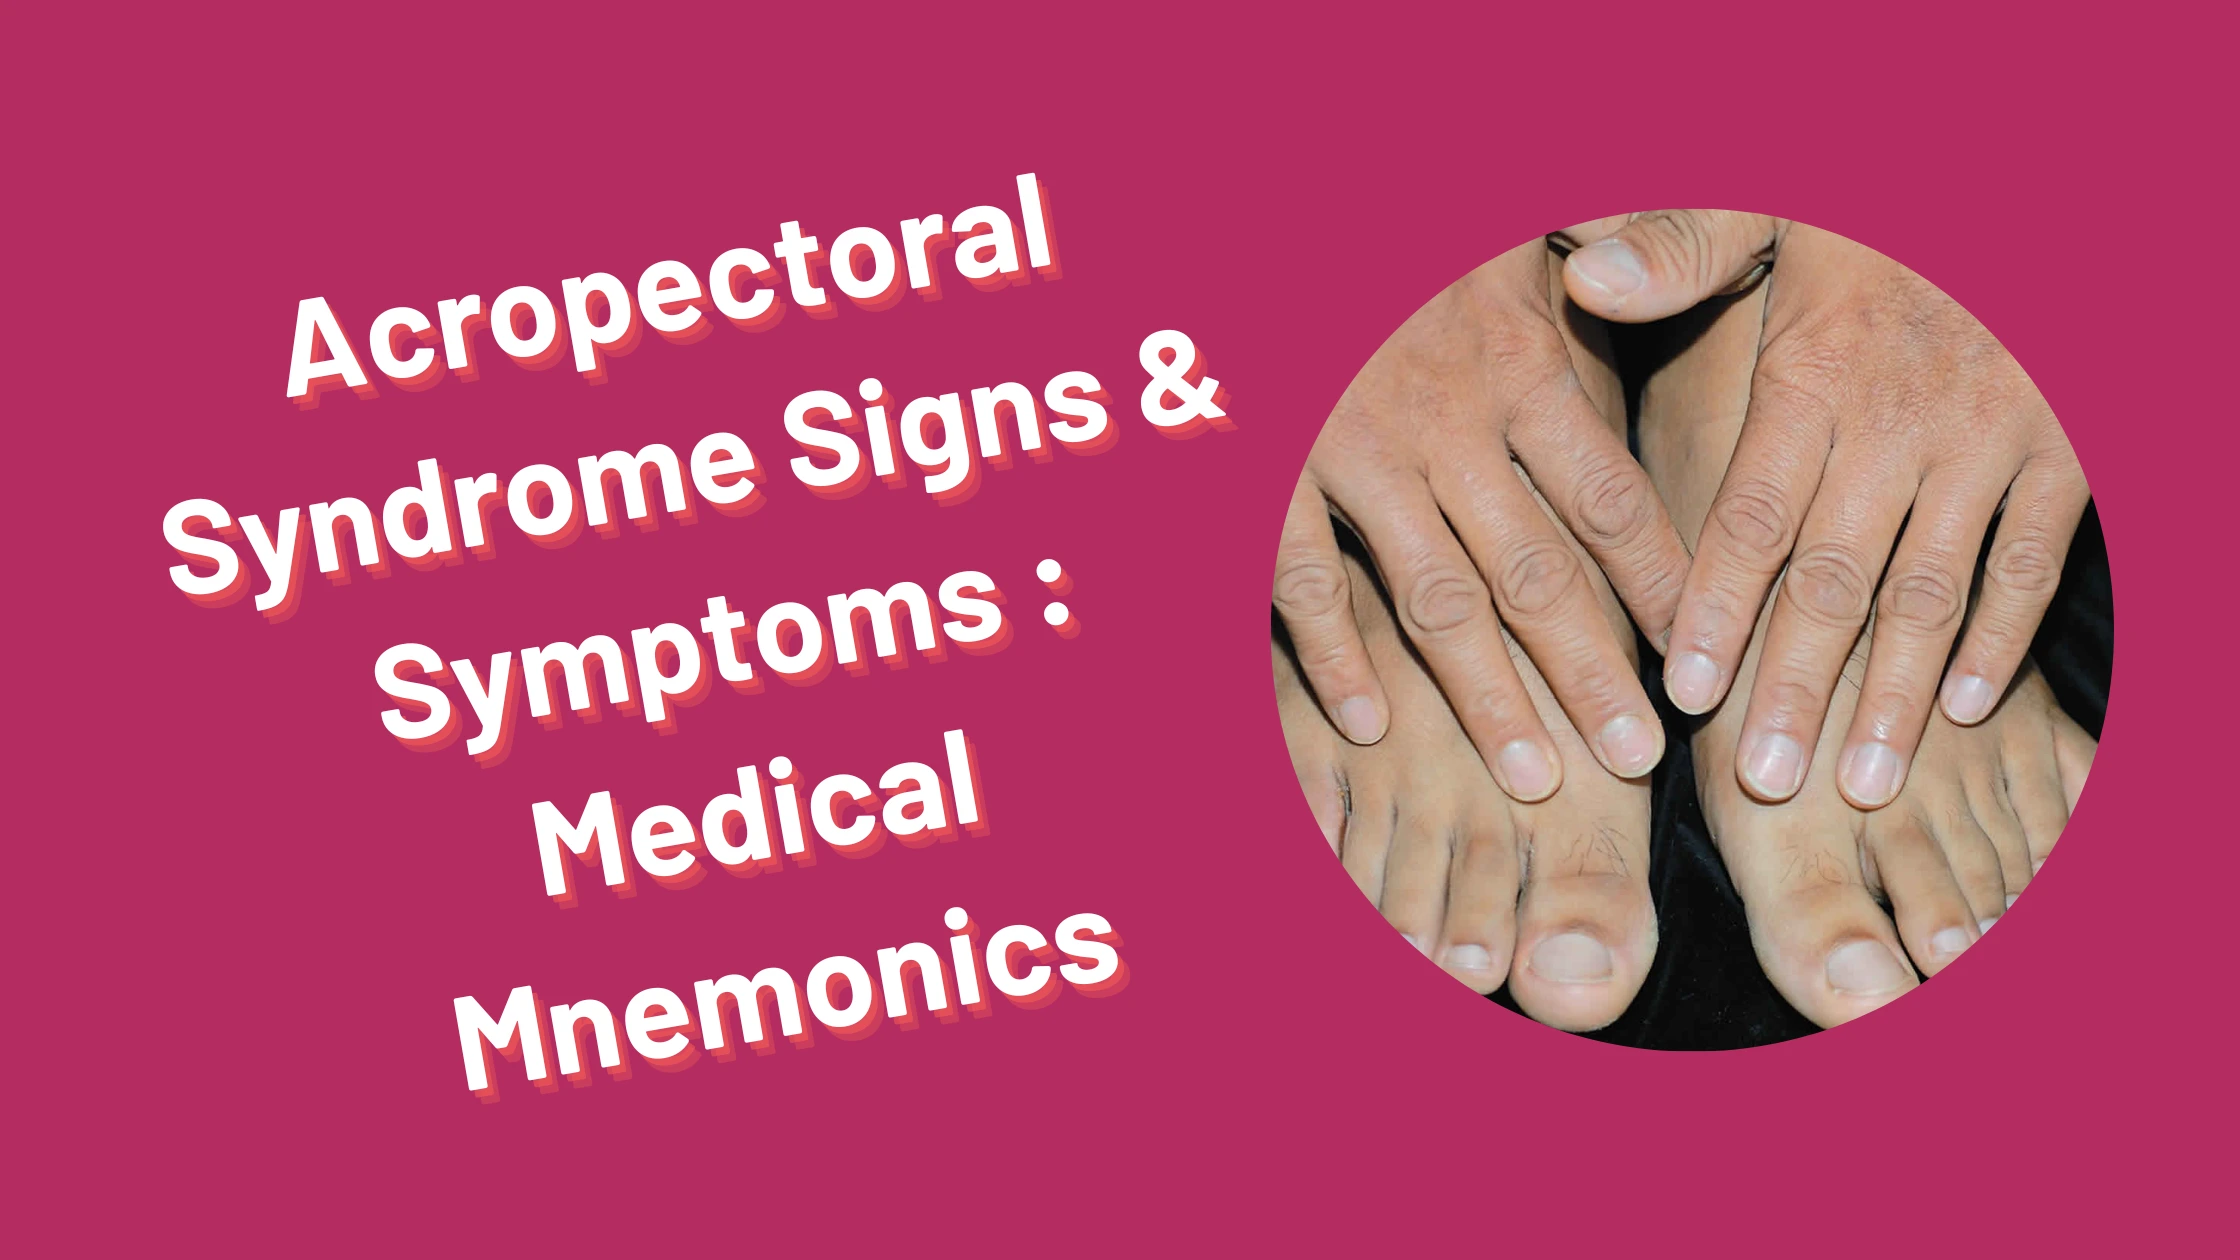 You are currently viewing [Very Cool] Mnemonic : Acropectoral Syndrome Signs & Symptoms